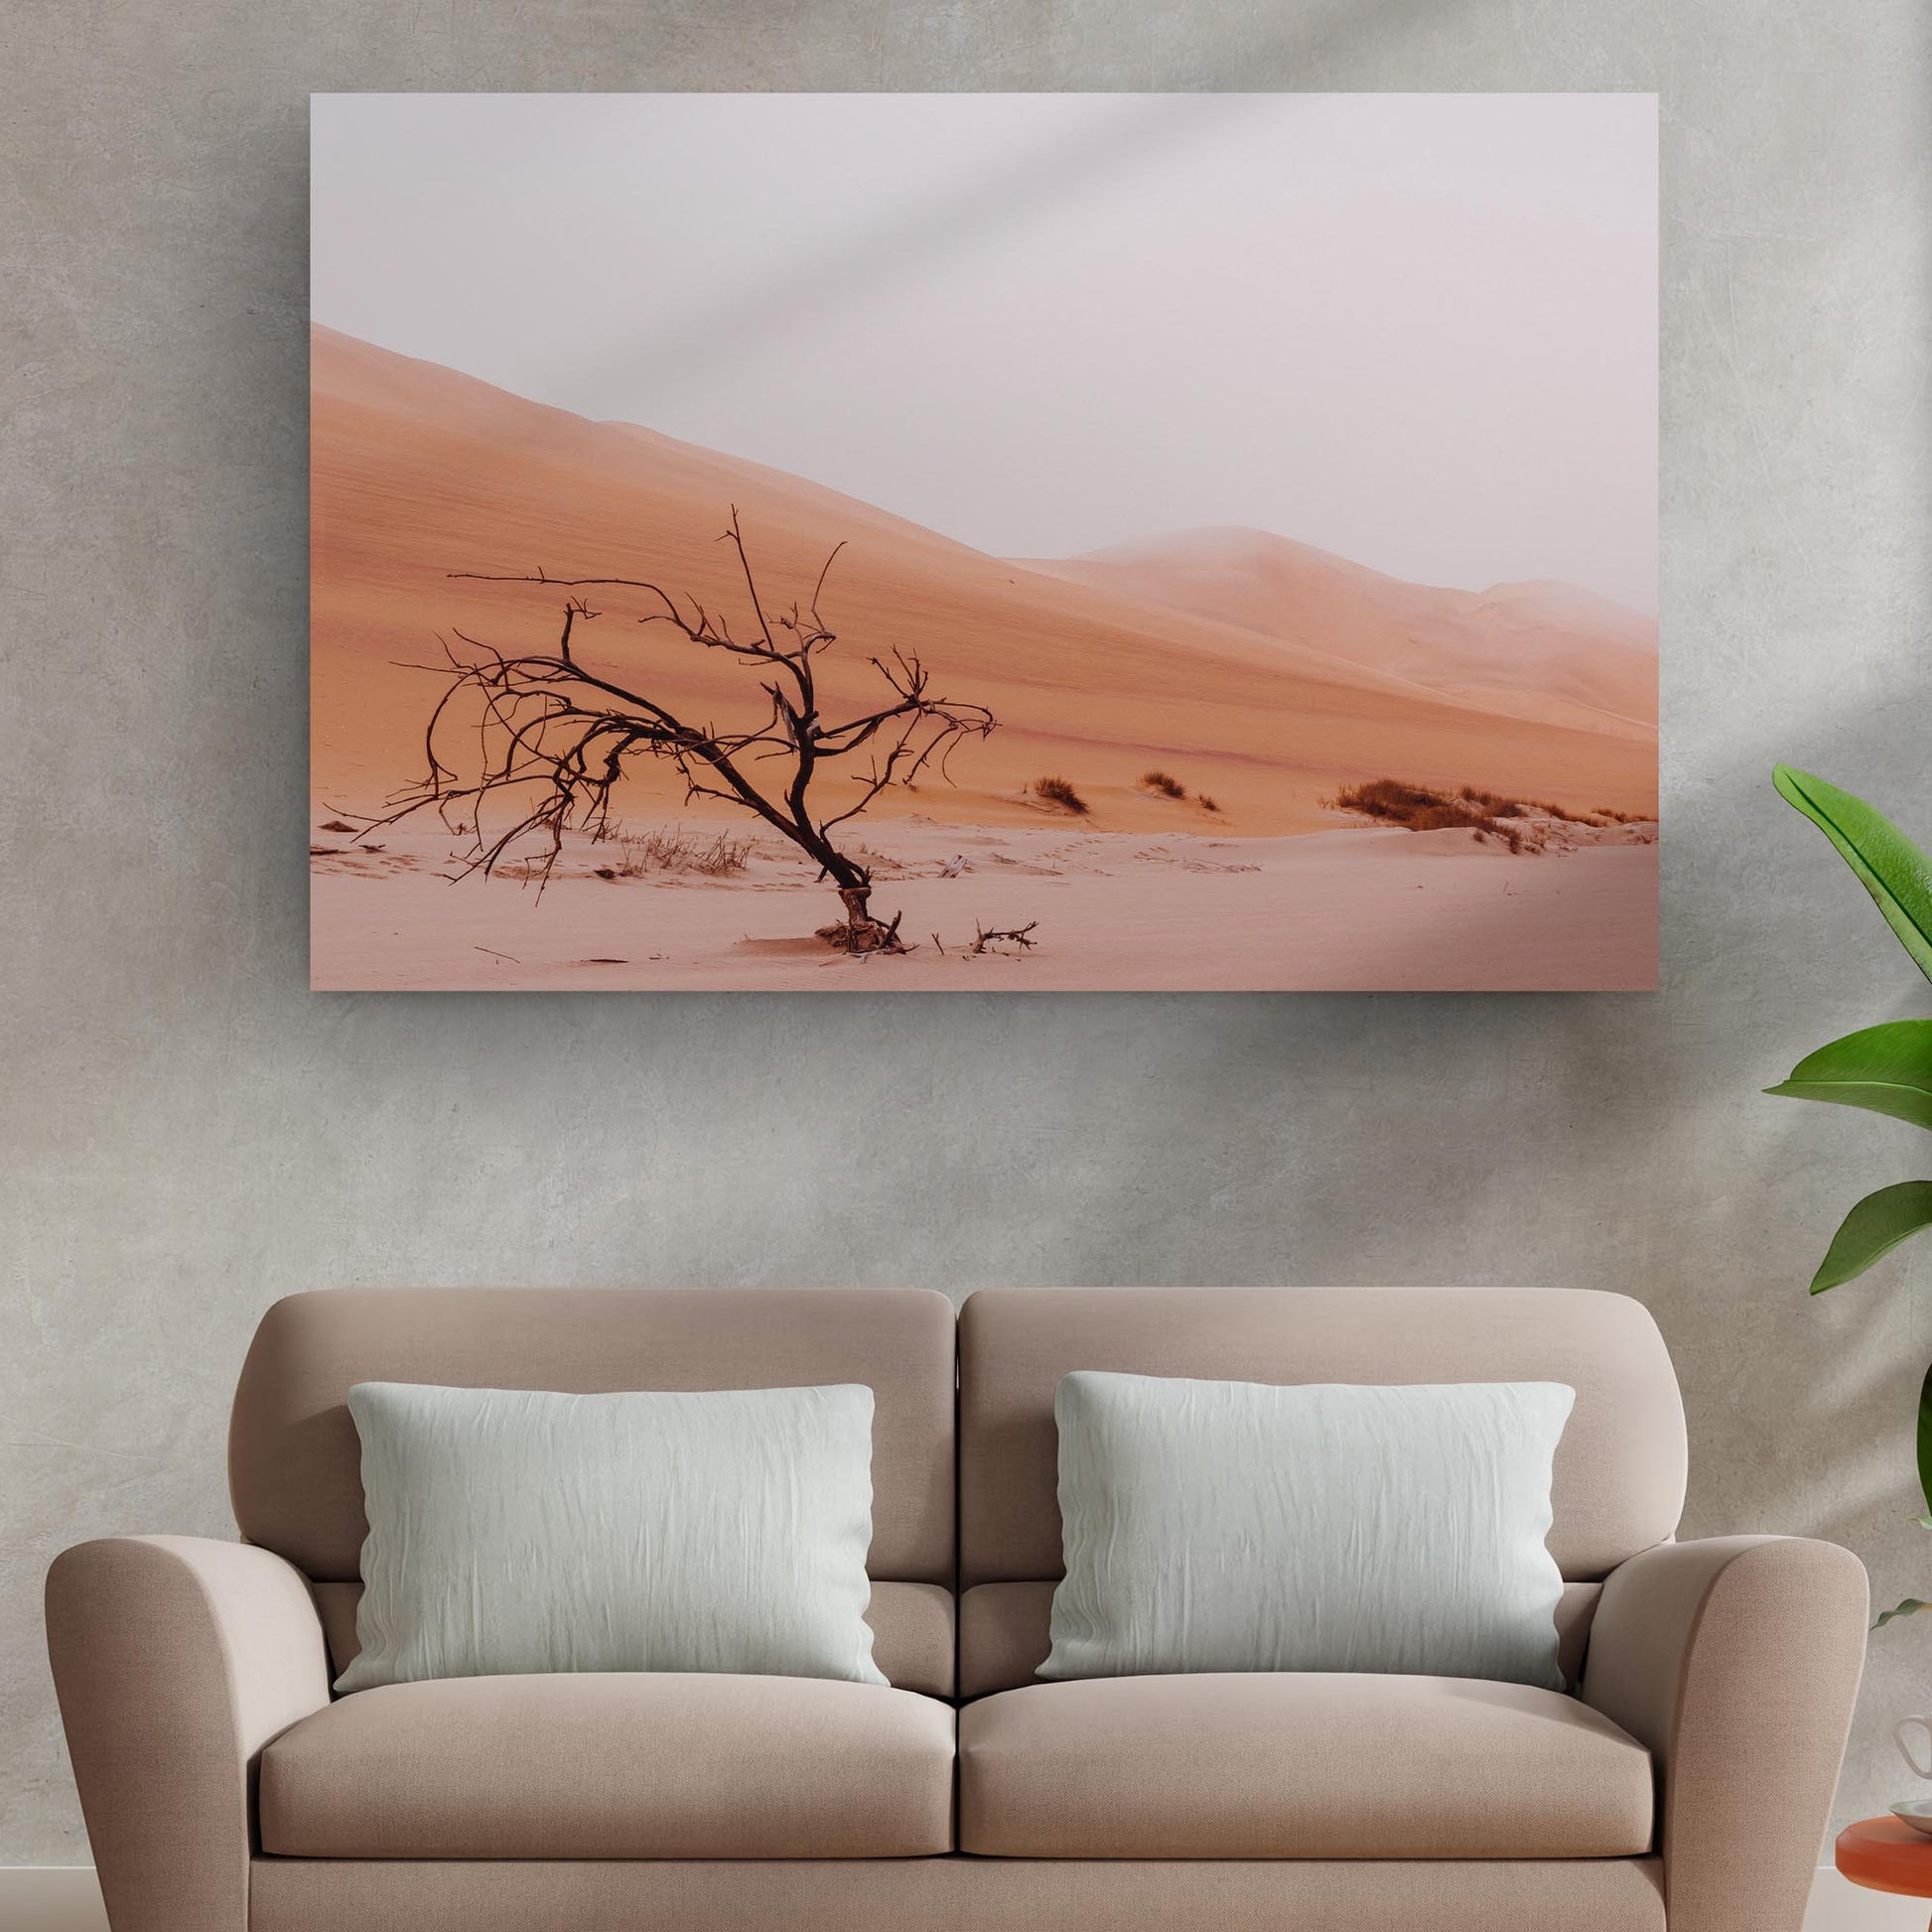 Into The Desert Canvas Wall Art - Image by Tailored Canvases